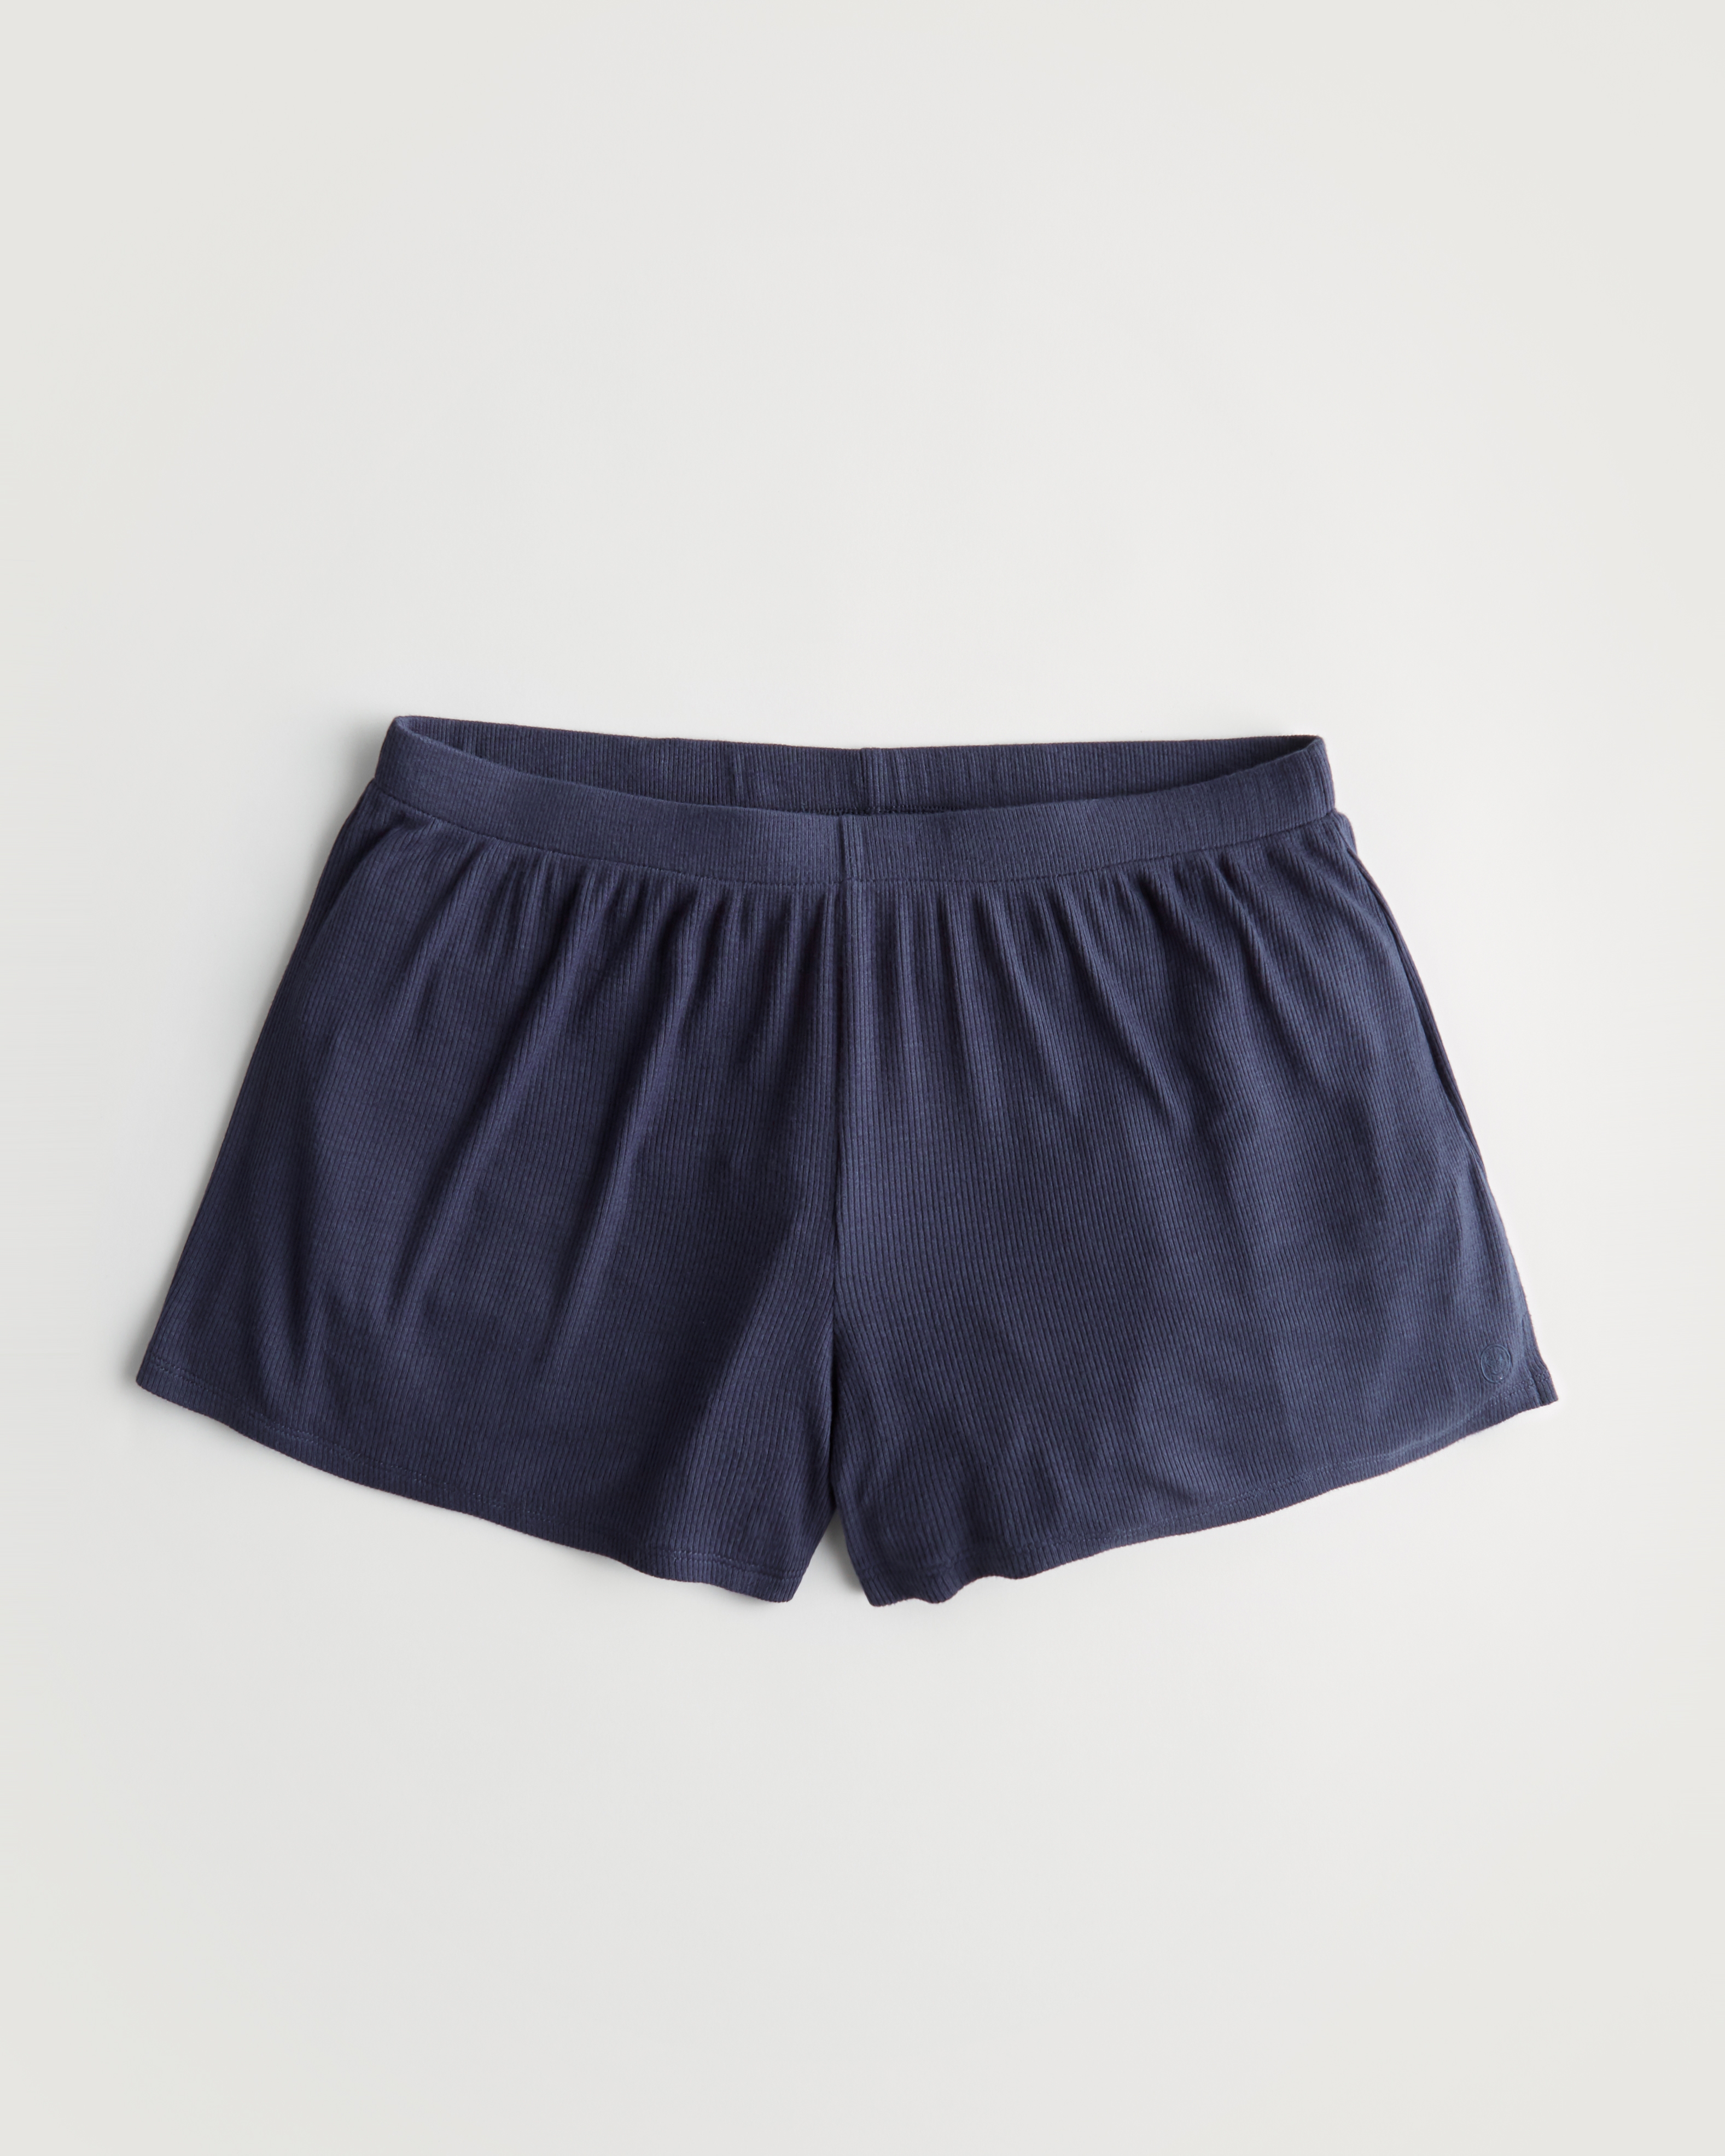 Hollister Gilly Hicks Ribbed Jersey Shorts